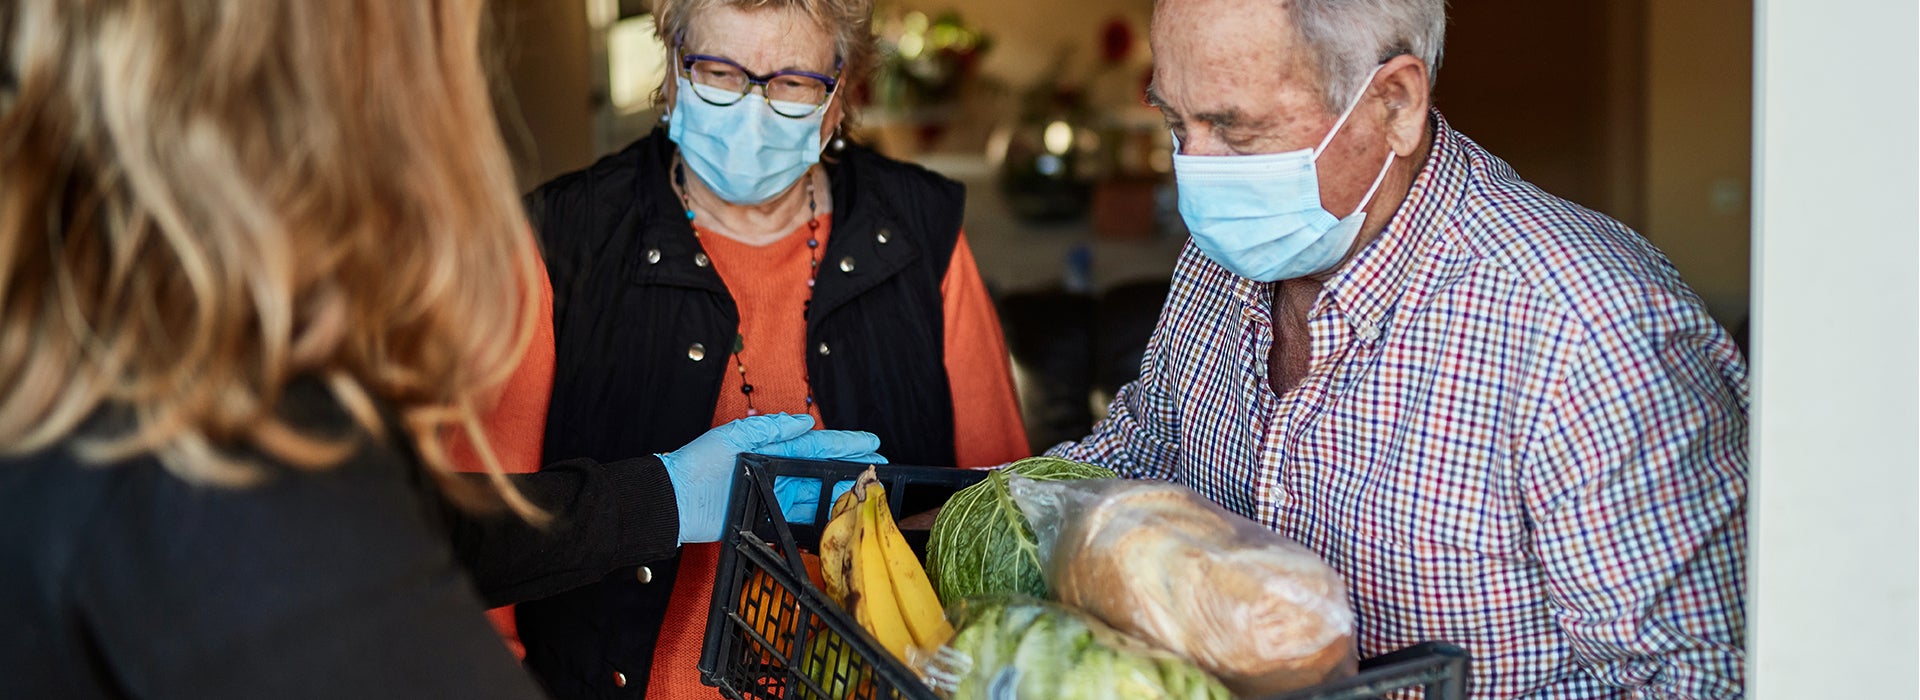 A man and a woman wearing mouth masks, receive a box of groceries